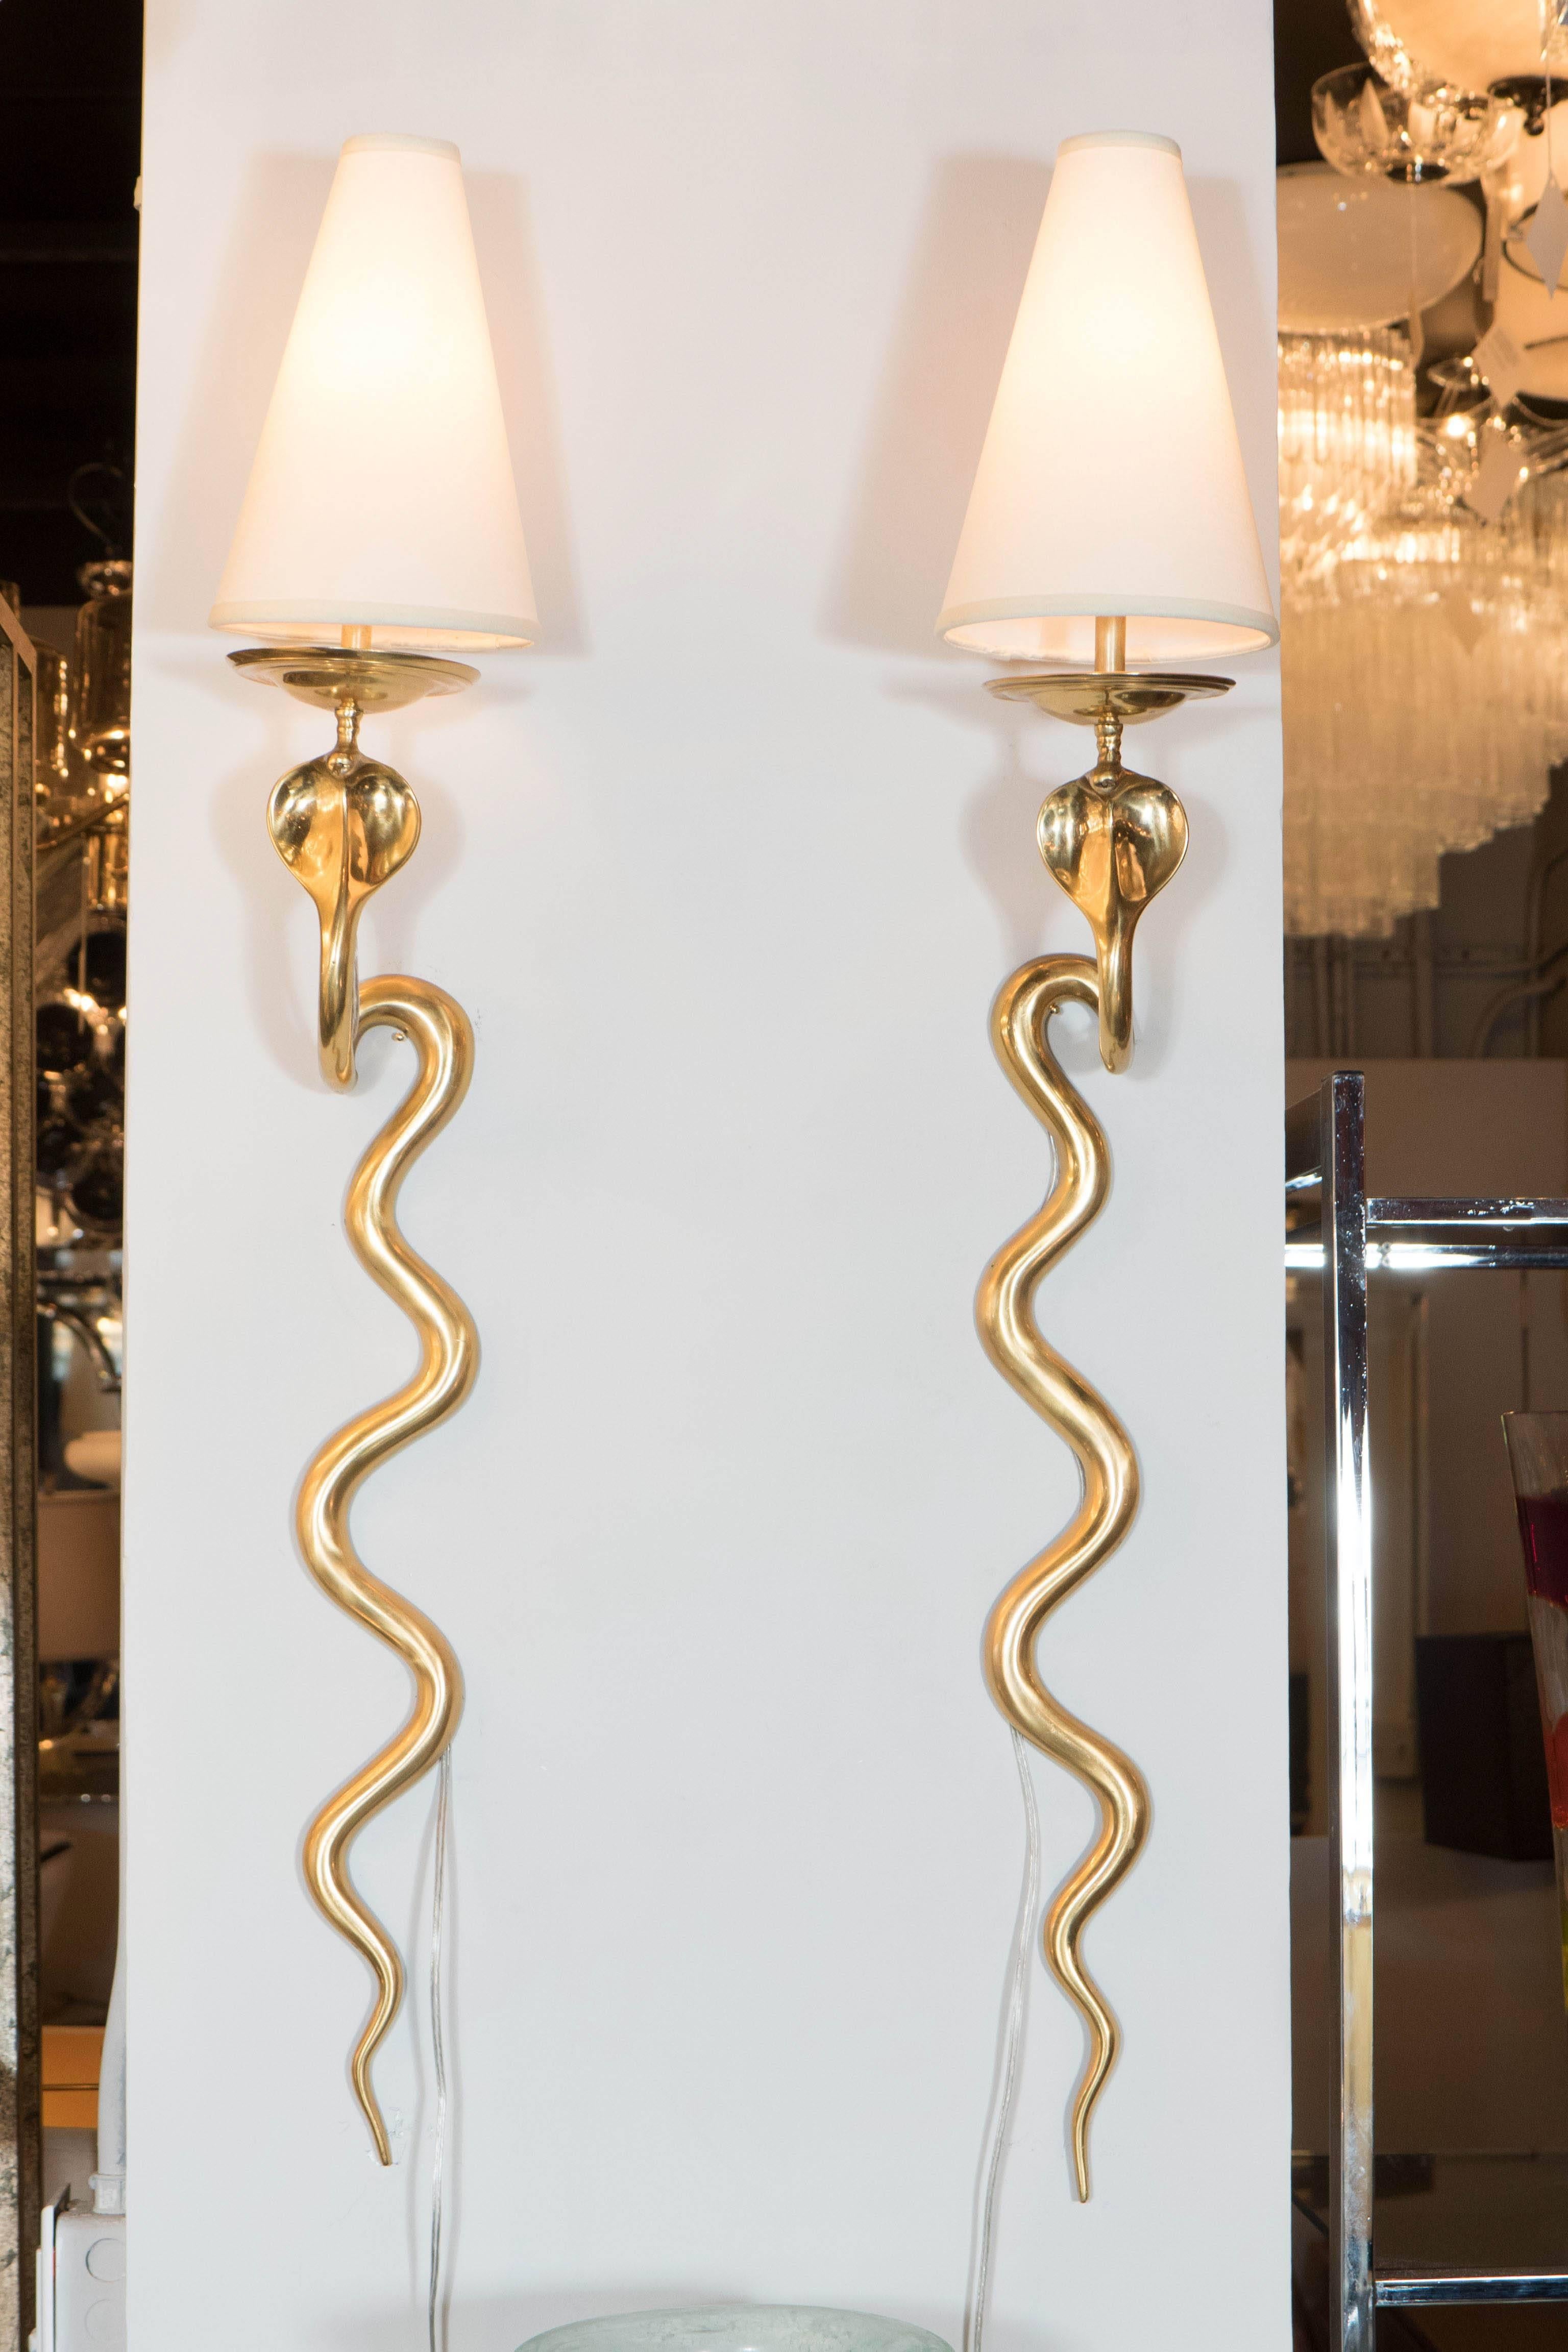 An exotic and rare pair of polished brass cobra sconces with custom shades. The snakes' tails rest on the wall while the heads, fitted with brass tongues, support candelabra sockets and conical-shaped custom white shades. An imposing pair for any